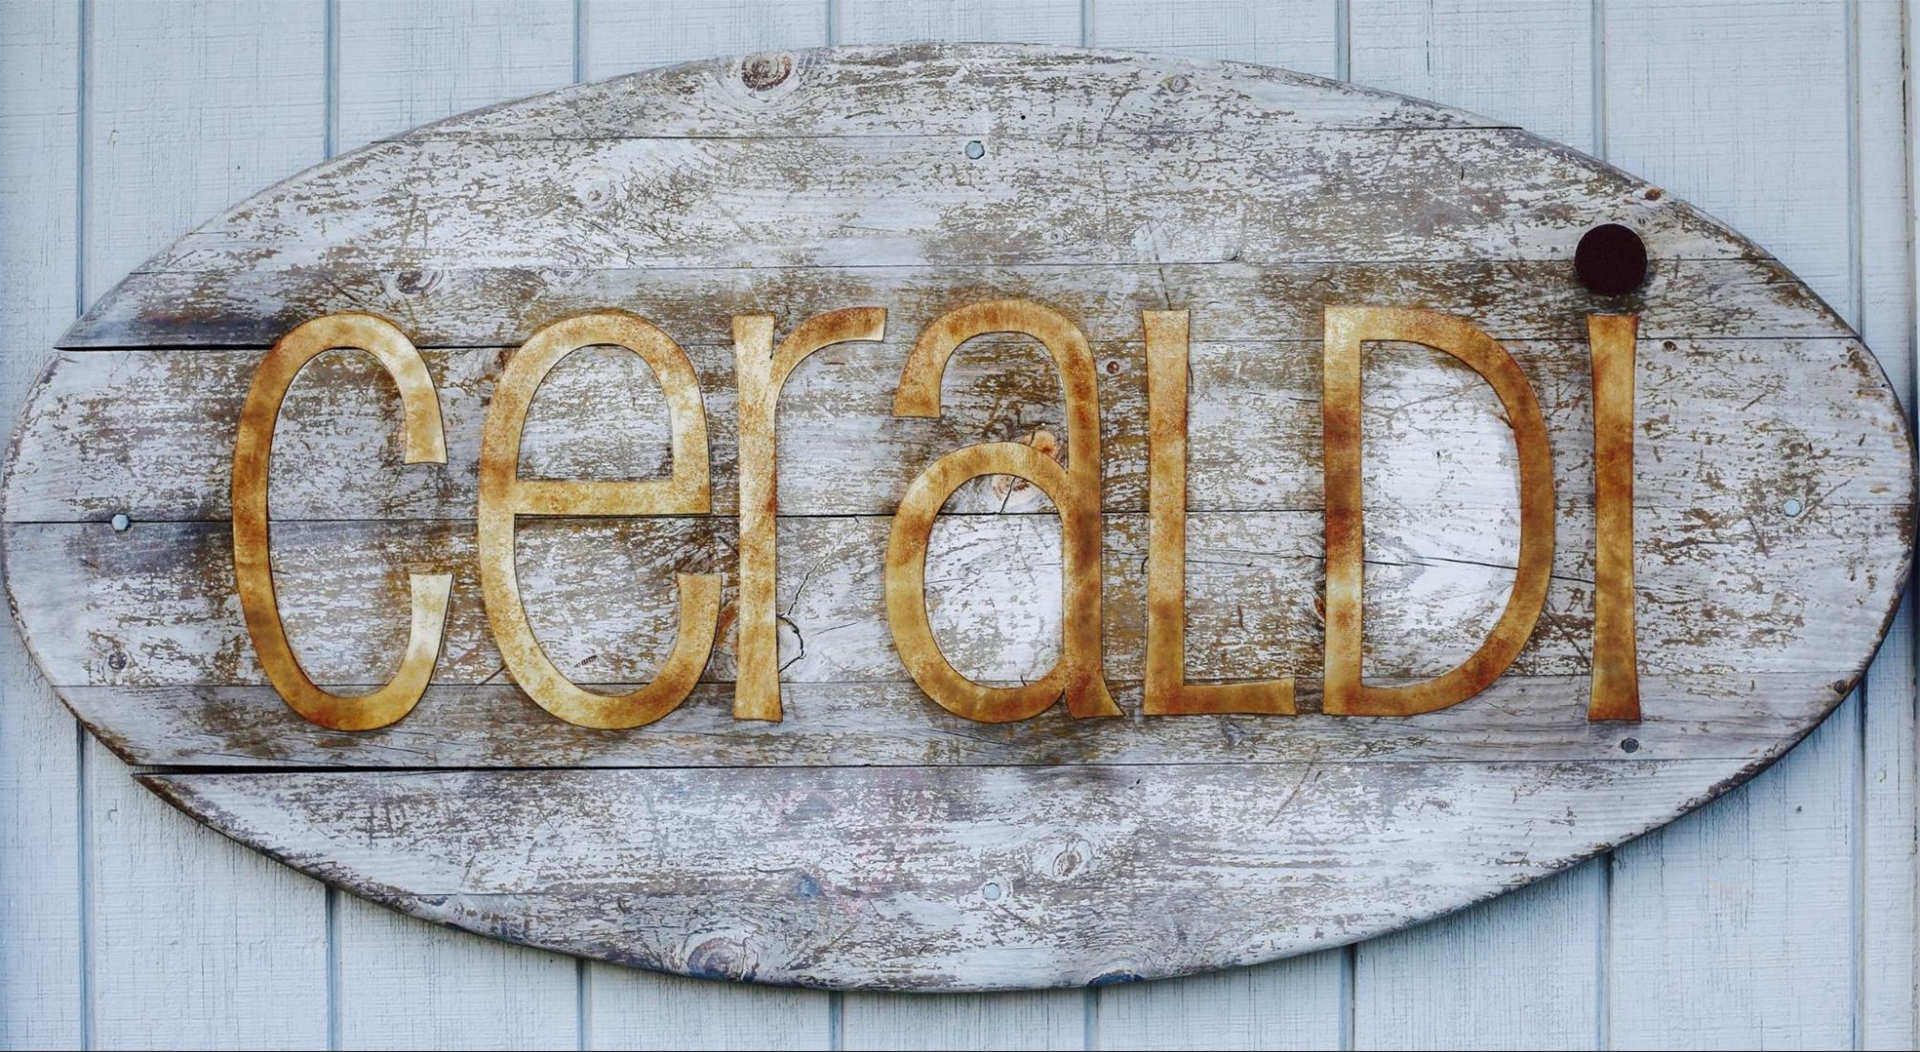 If you're looking for an intimate night out during your Cape Cod vacation, look no further than Ceraldi in Wellfeet for a unqiue farm-to-table experience.